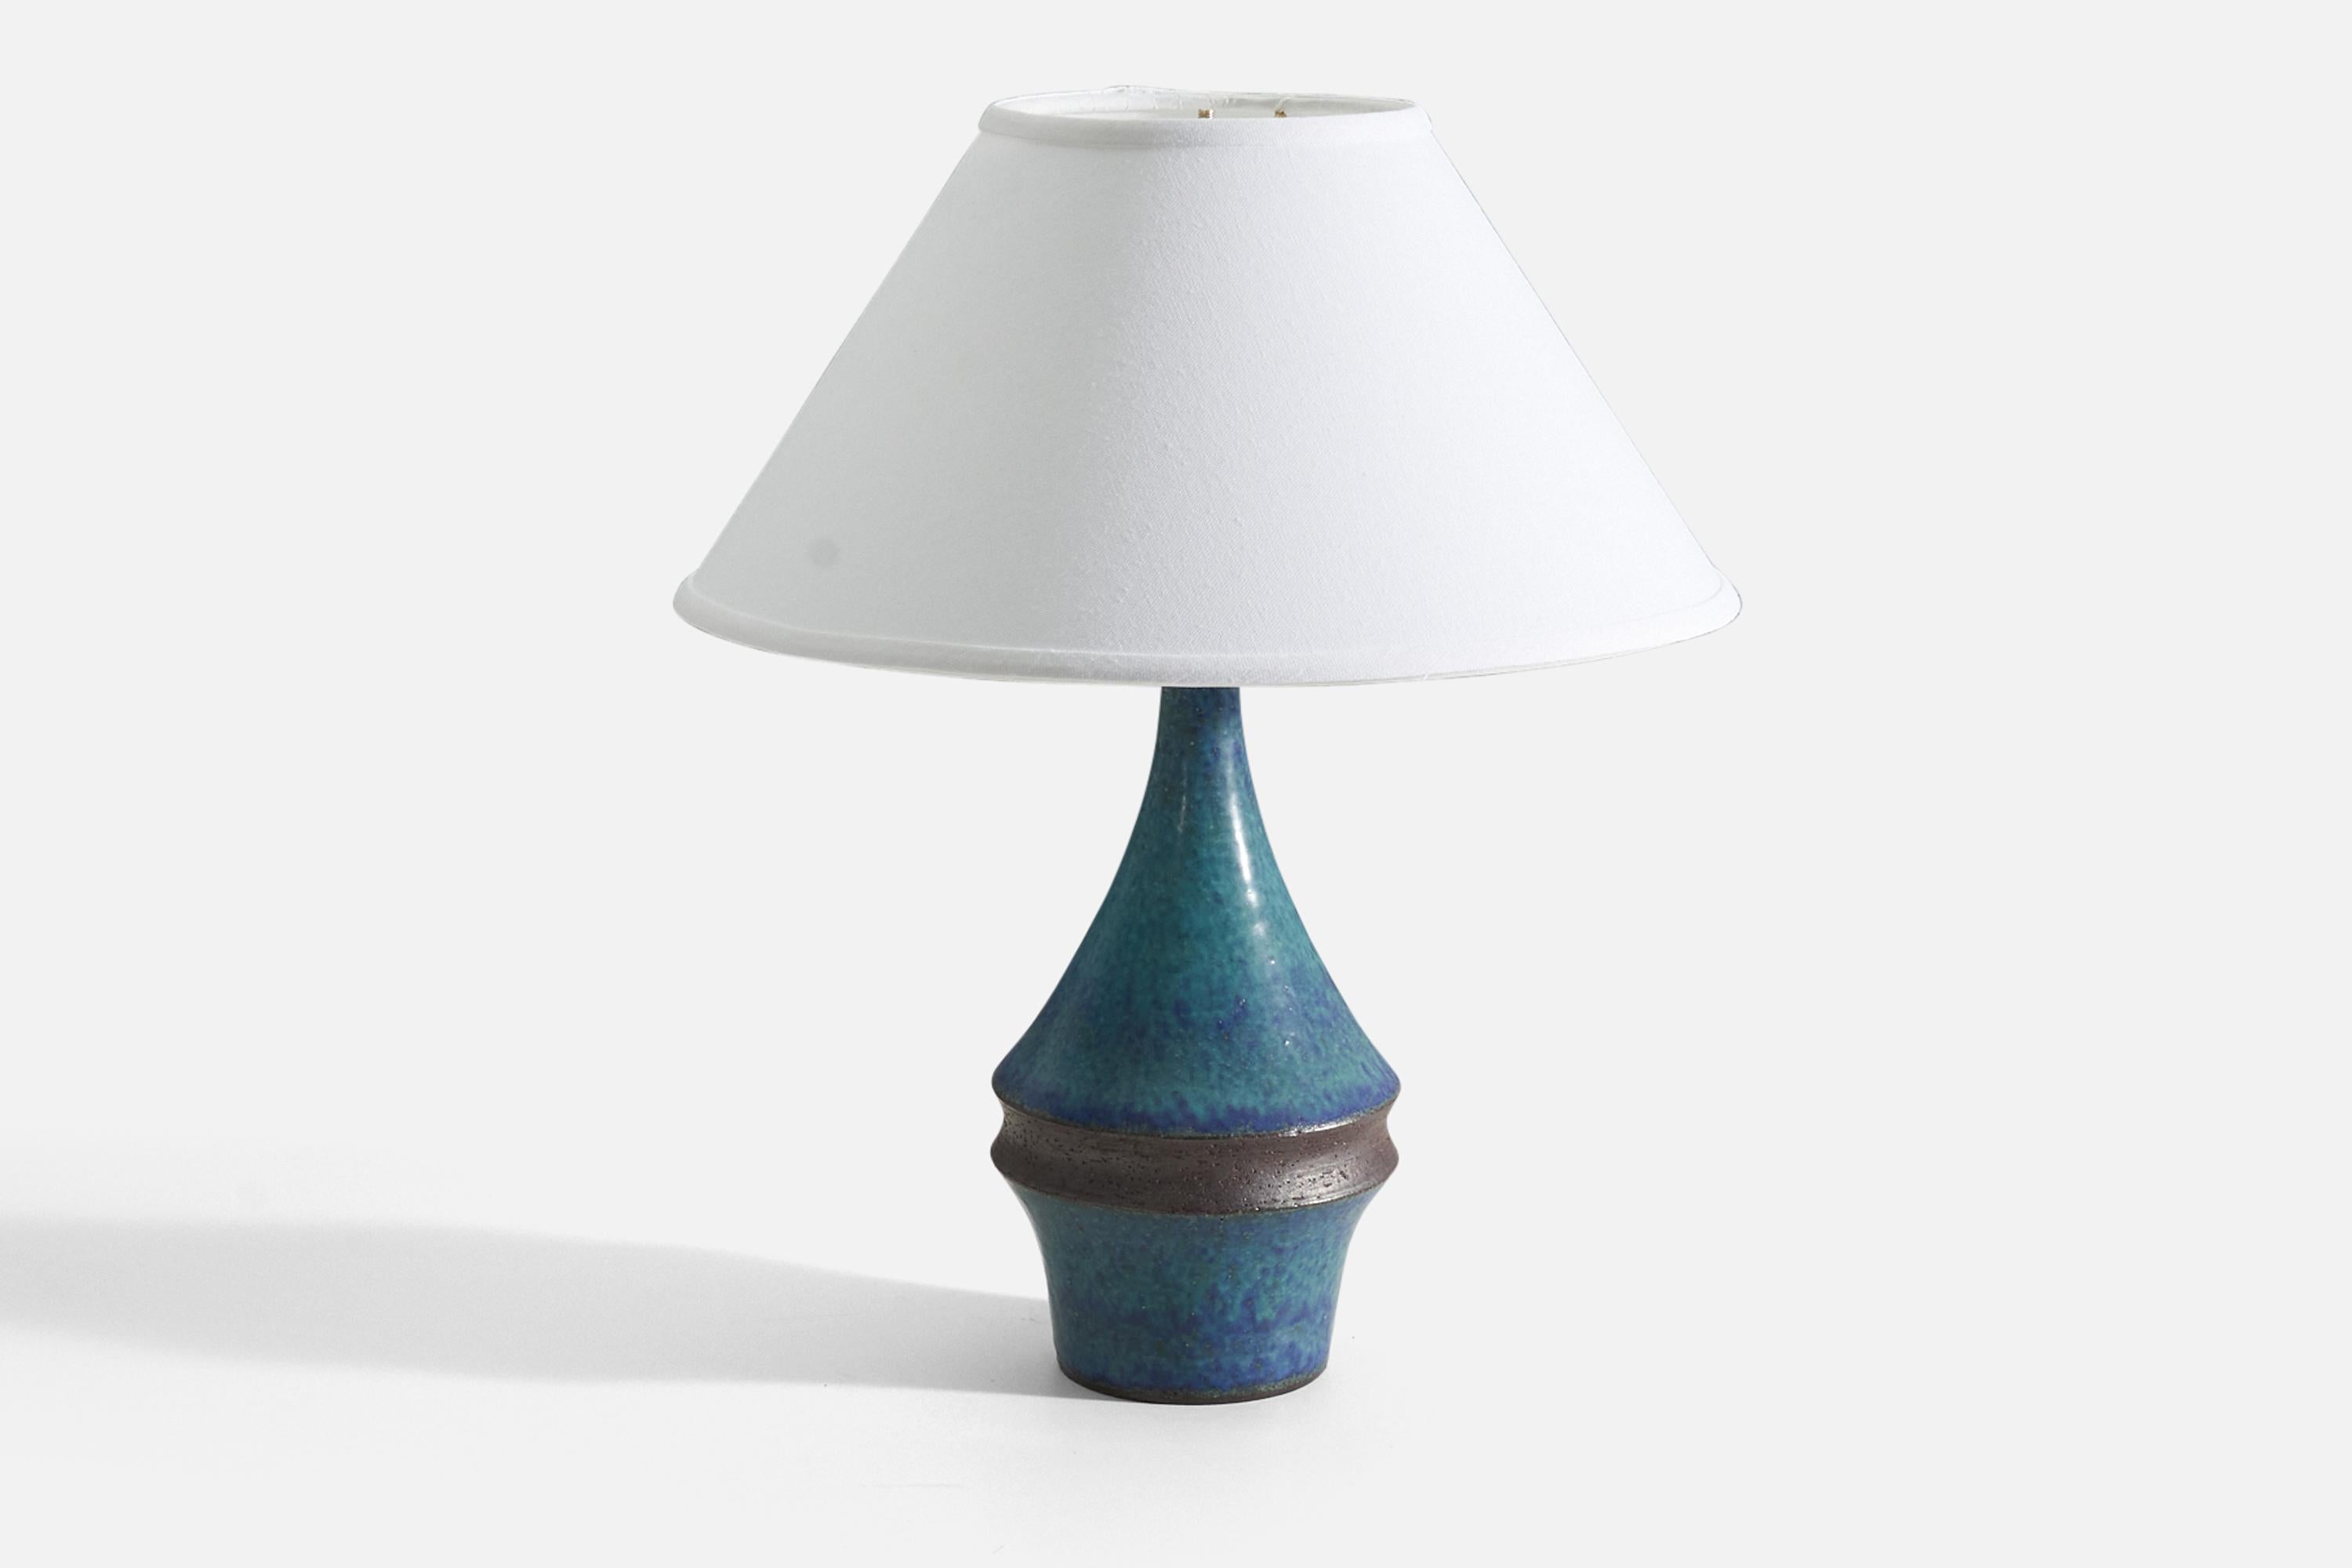 A table lamp designed by Marianne Starck produced by Michael Andersen Keramik. Signed and labeled.

Purchase excludes lampshade. Stated measurements excluding lampshade. Height includes socket with no lightbulb.

Glaze features a blue color.

Other